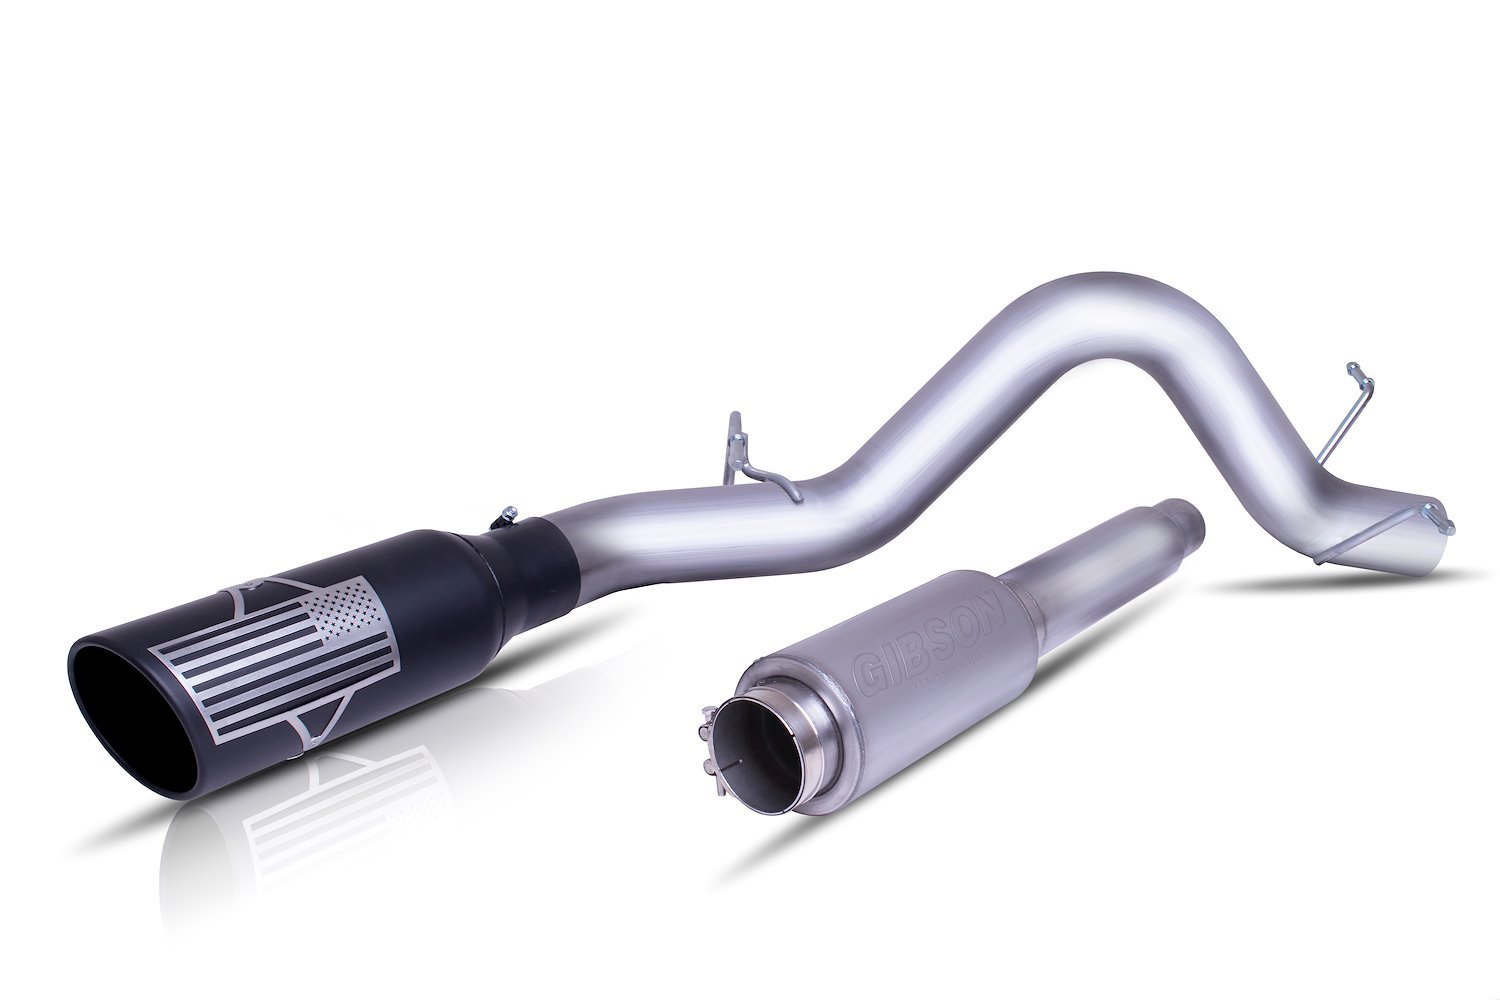 Patriot Series Cat-Back Exhaust System for 2014-Up Chevy Silverado/GMC Sierra Crew Cab